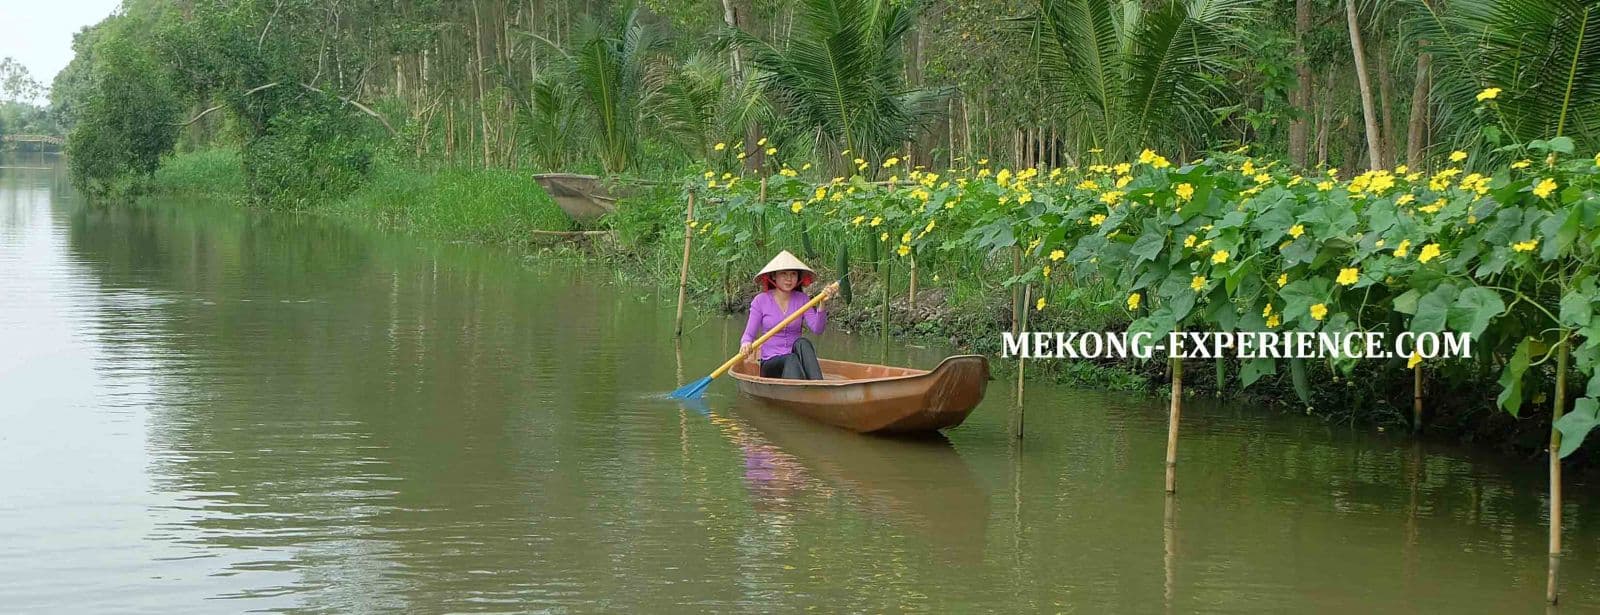 Mekong Experience Travel | Can Tho Tours, Mekong Eco Tours, Mekong Delta Tours